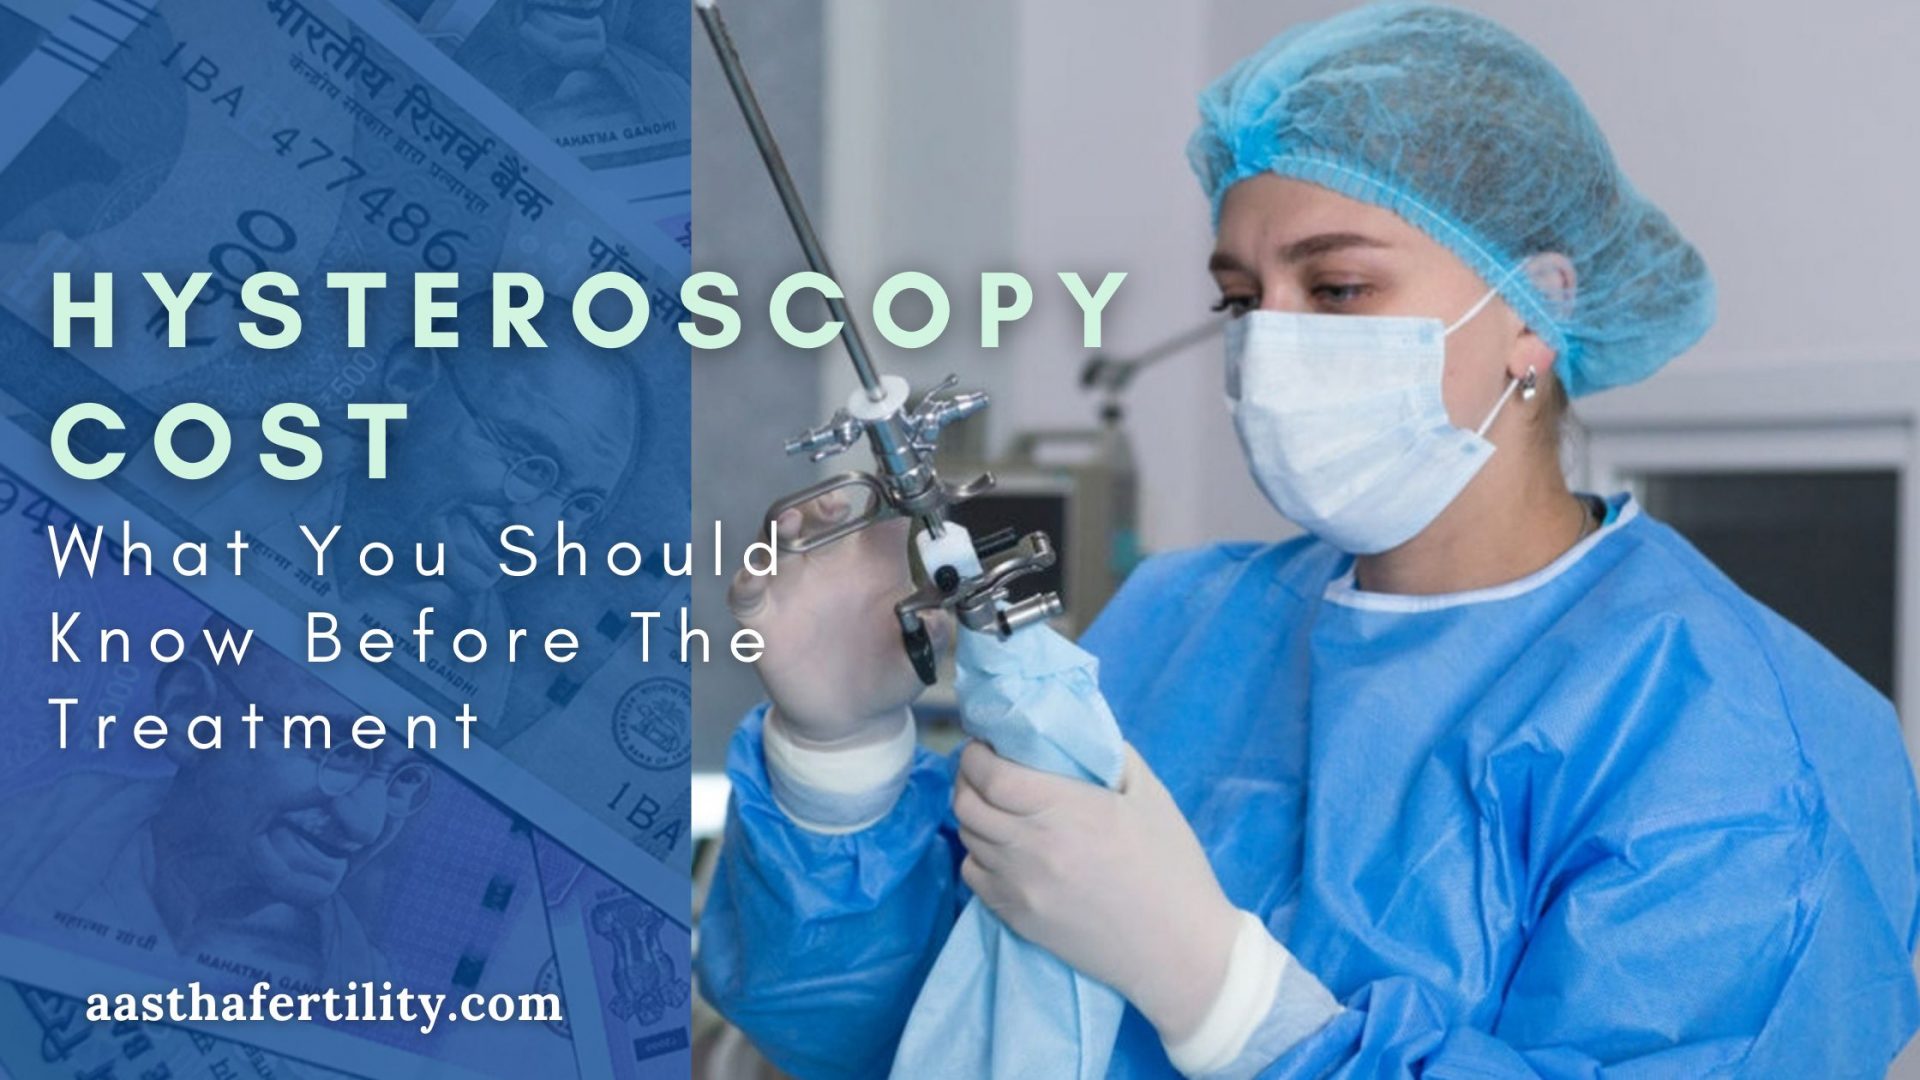 Hysteroscopy Cost: What You Should Know Before The Treatment